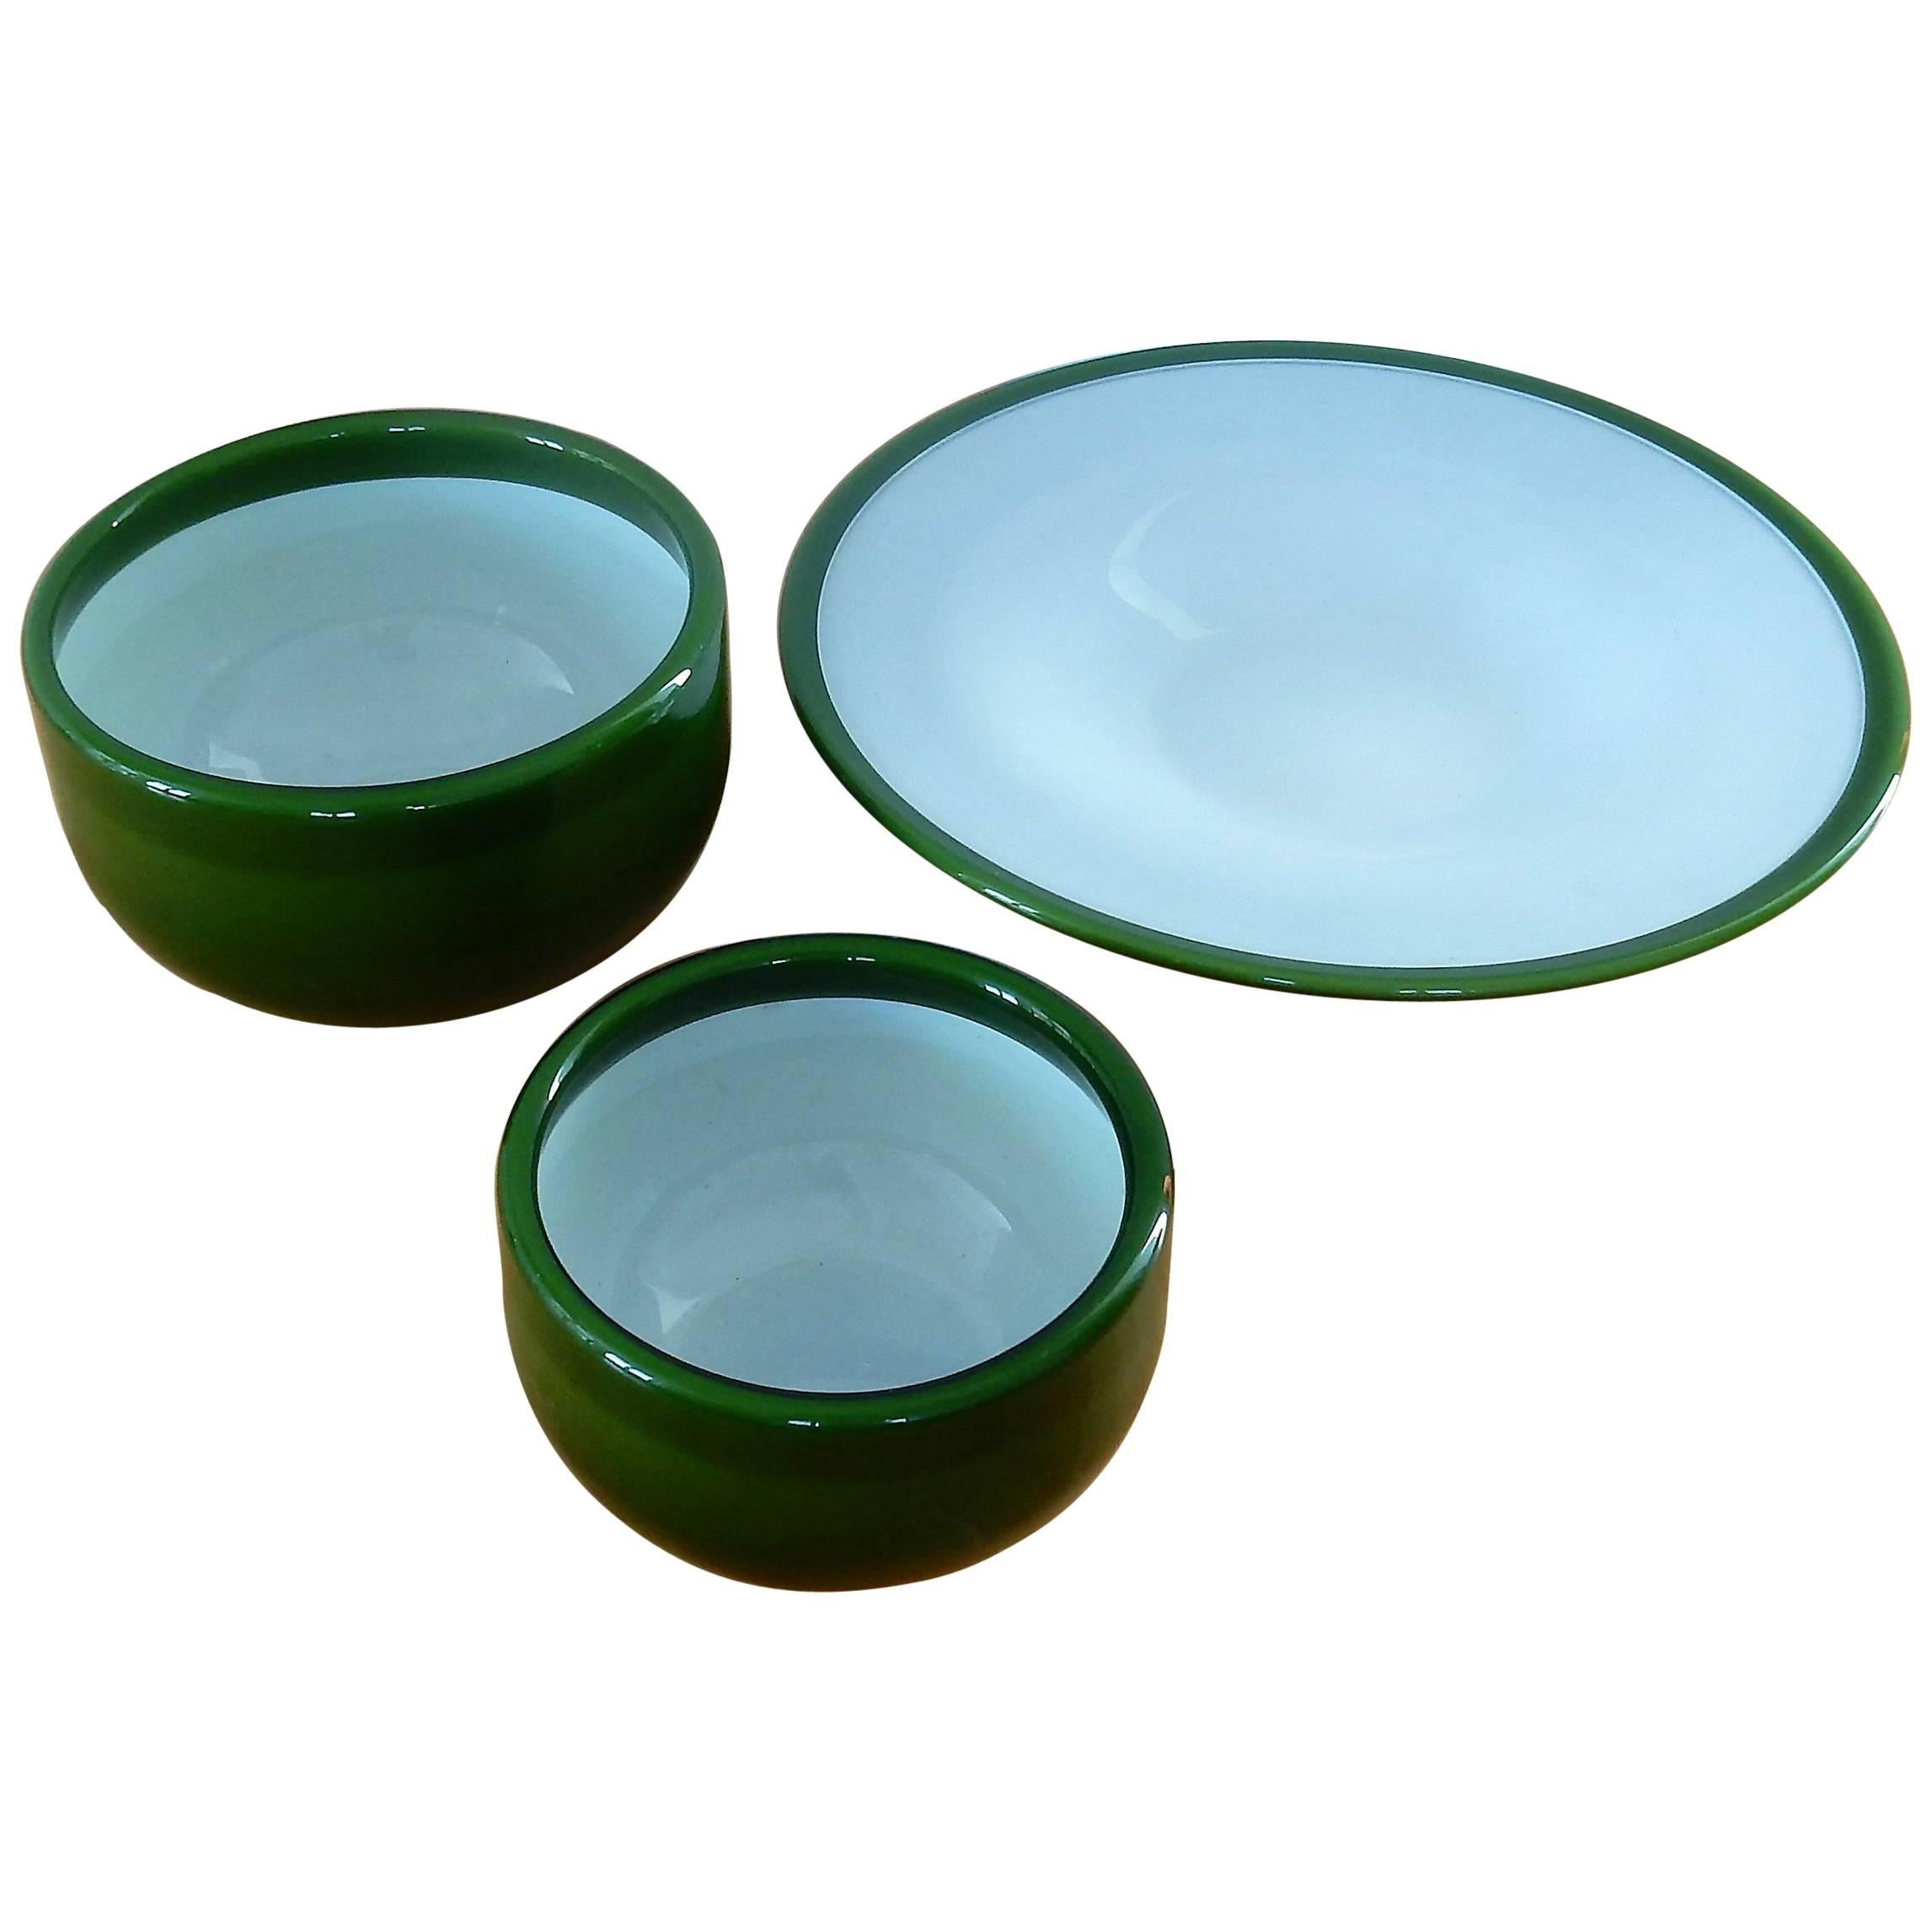 Set of Three Green 'Palet' Glass Bowls from Holmegaard by Michael Bang, Denmark